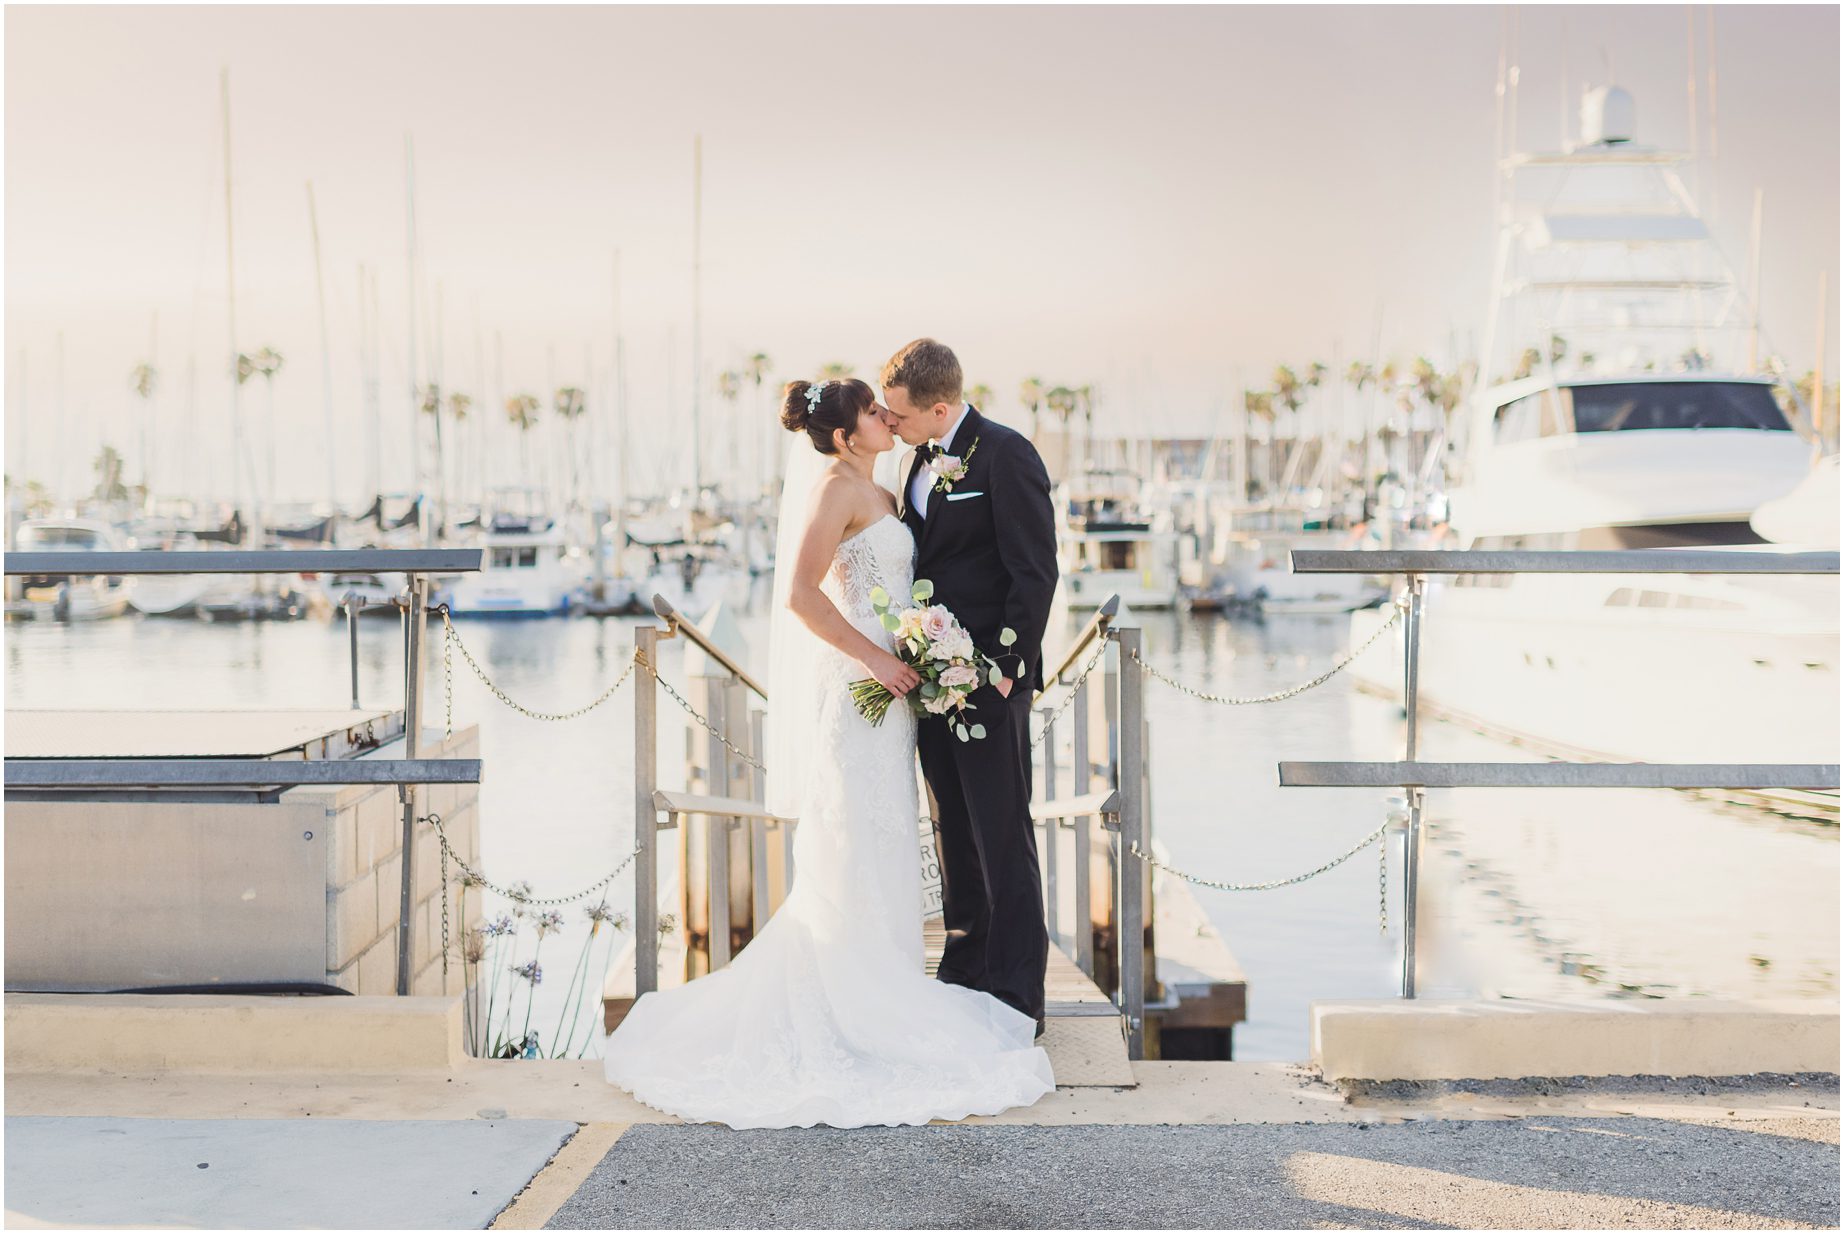 Kevin and Jenna Kiss in front of the marina on the day of their wedding at the Portofino Hotel in Redondo Beach